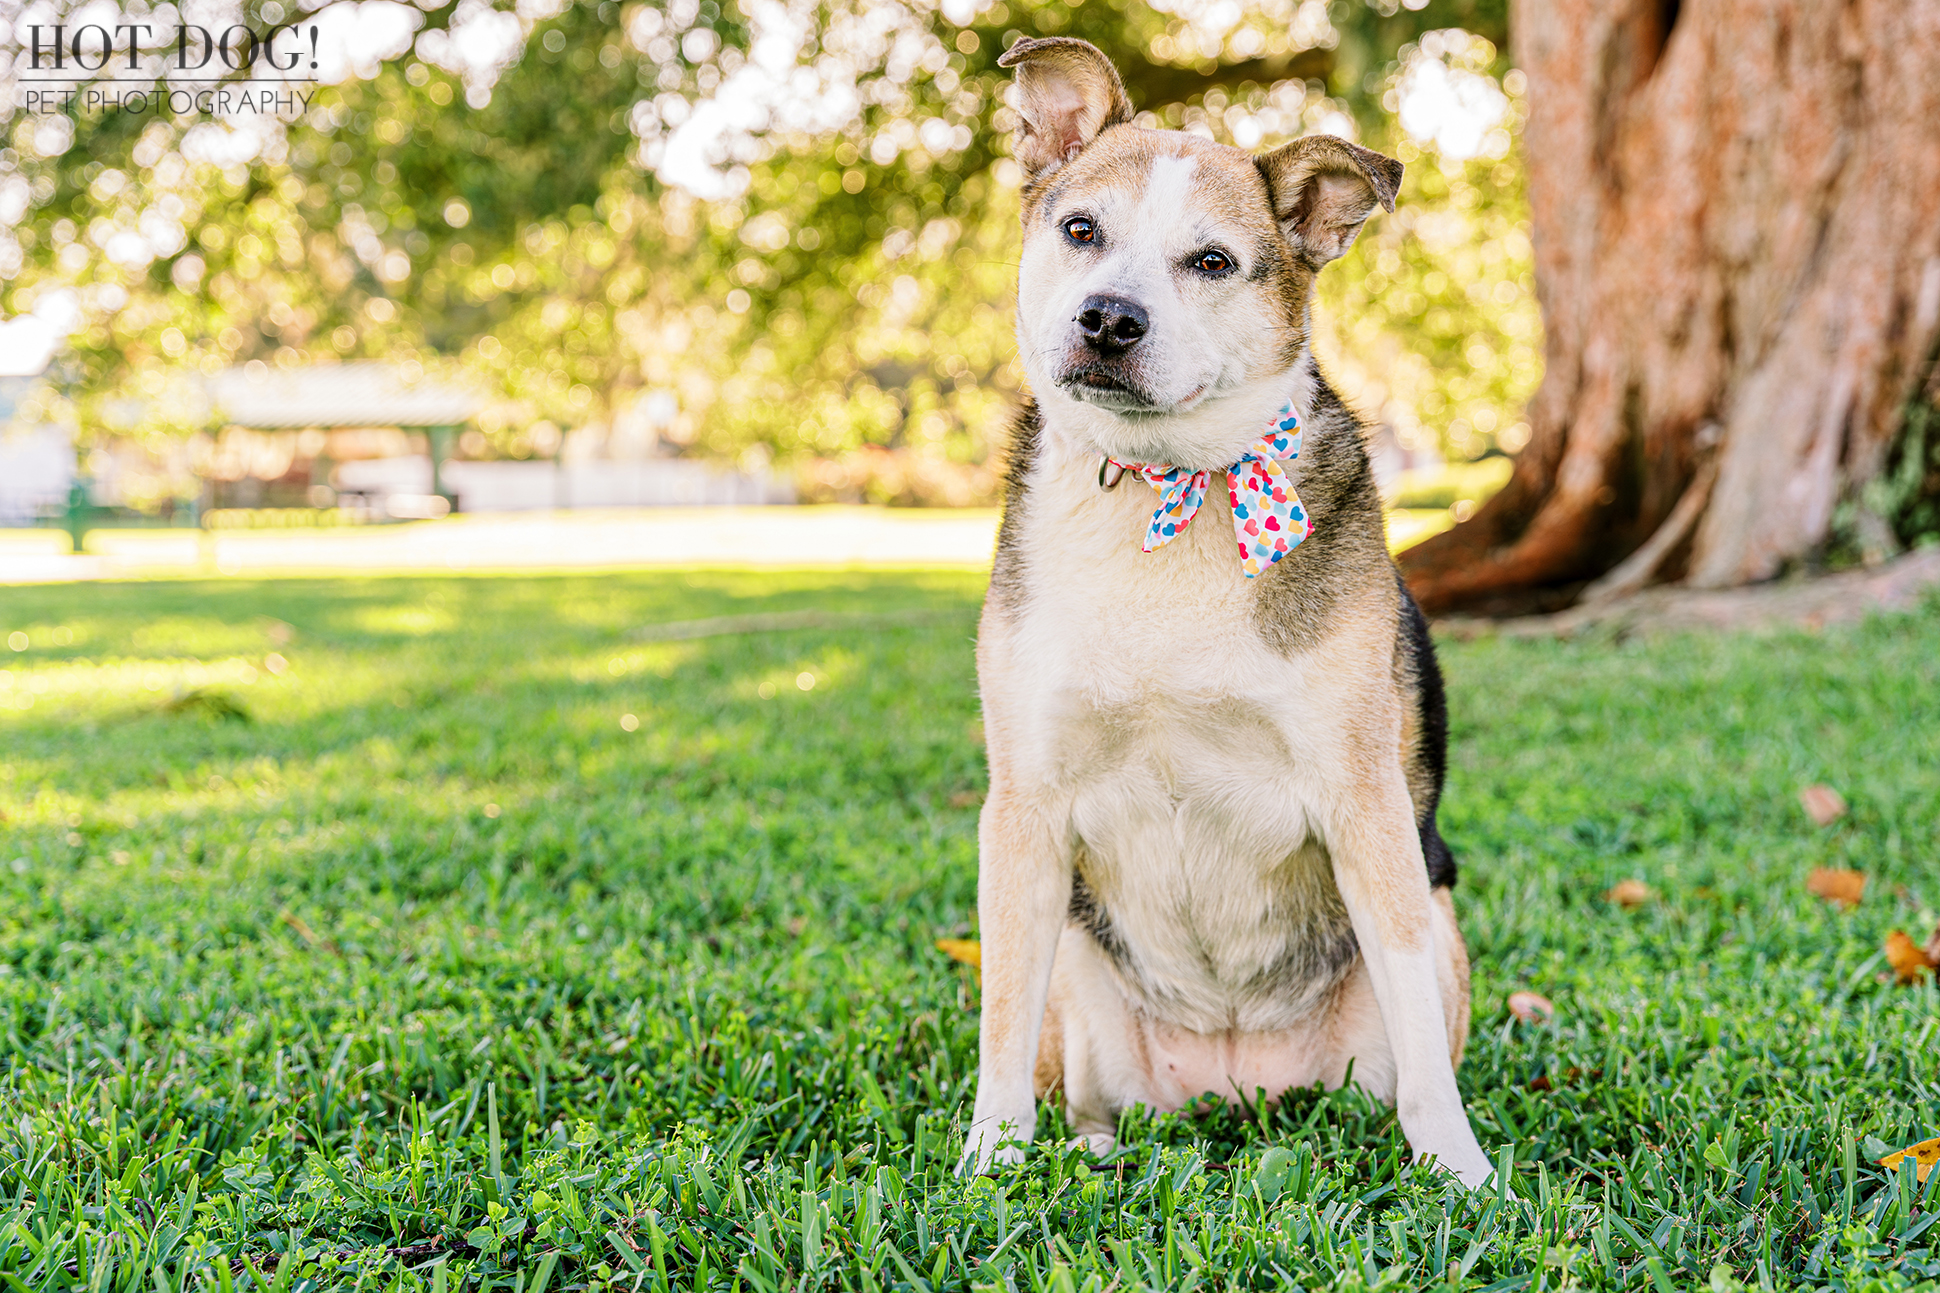 Newton Park's Newest Star: Zoe's infectious energy and captivating personality steal the show in this Newton Park photo session. (Photo by Hot Dog! Pet Photography)